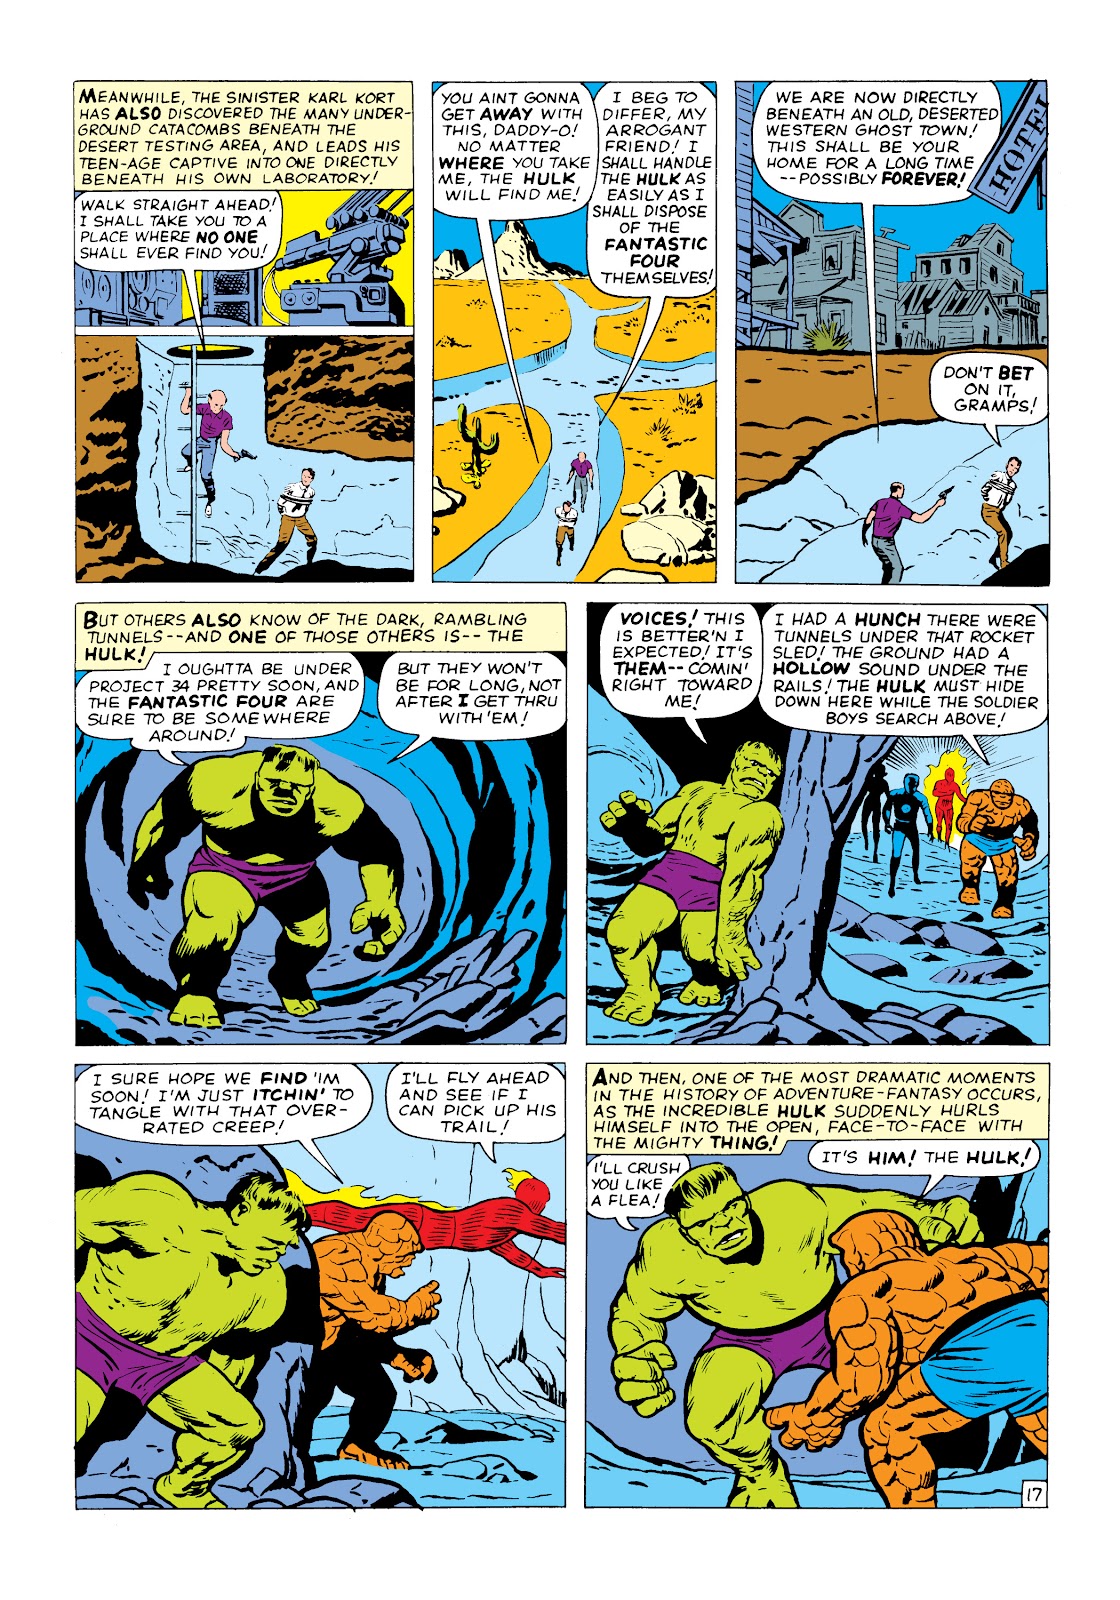 Read online Marvel Masterworks: The Fantastic Four comic - Issue # TPB 2 (Part 1) - 47